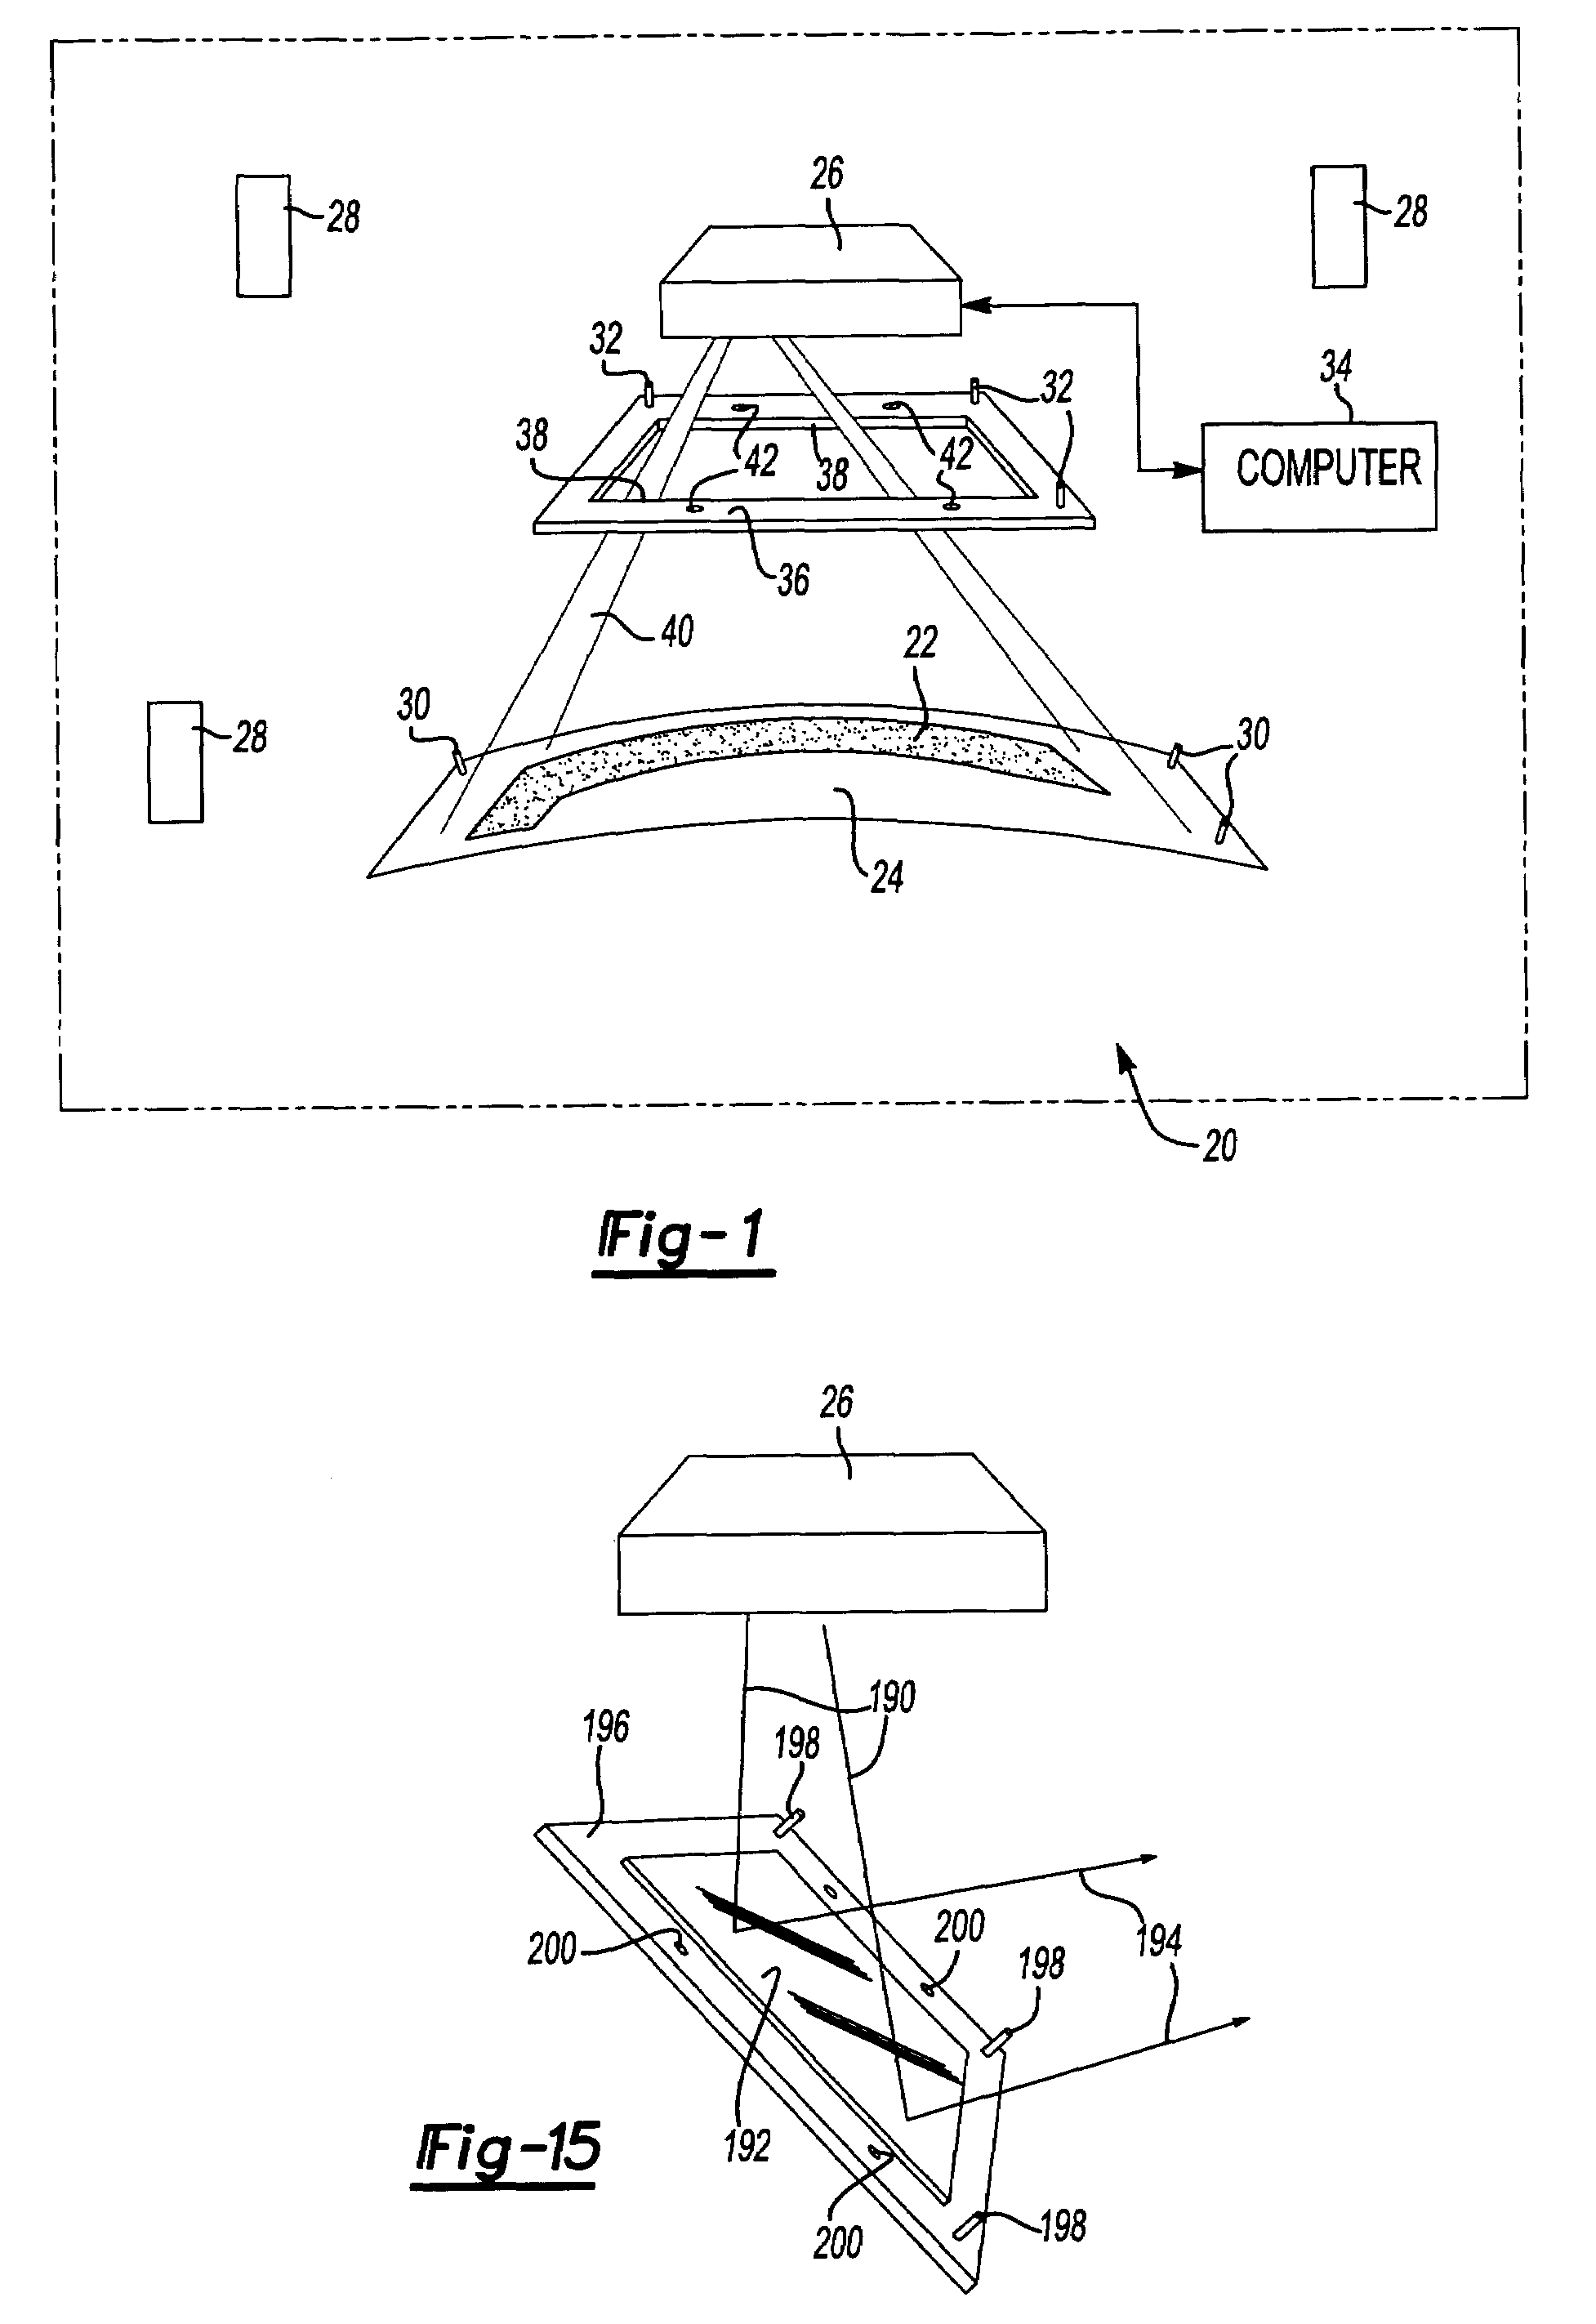 Laser projection systems and methods